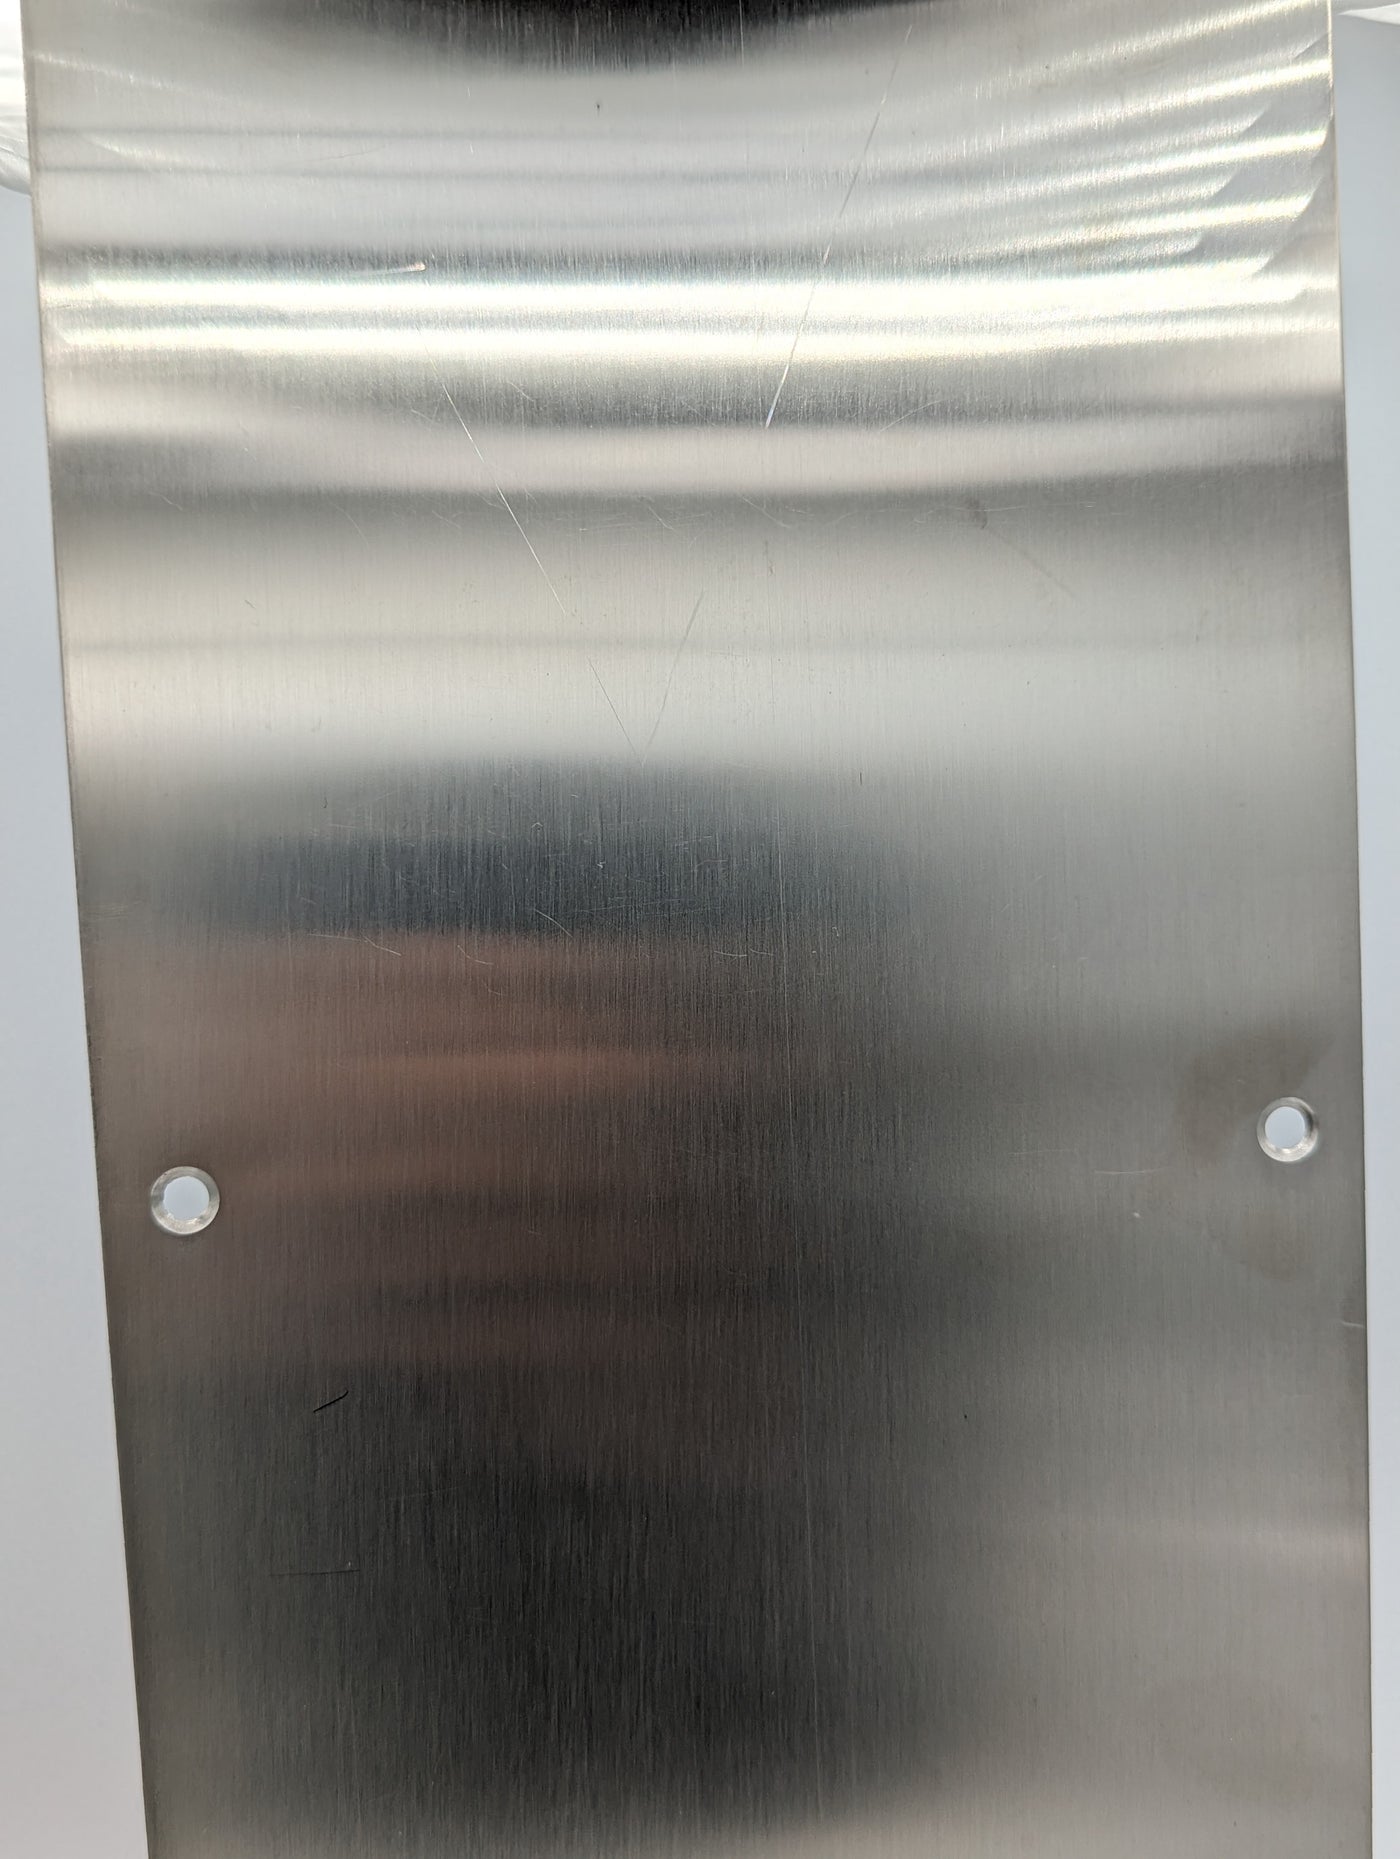 Open Box Sale Item 6 Inch x 34 Inch Stainless Steel Kick Plate (Brushed Nickel Finish)